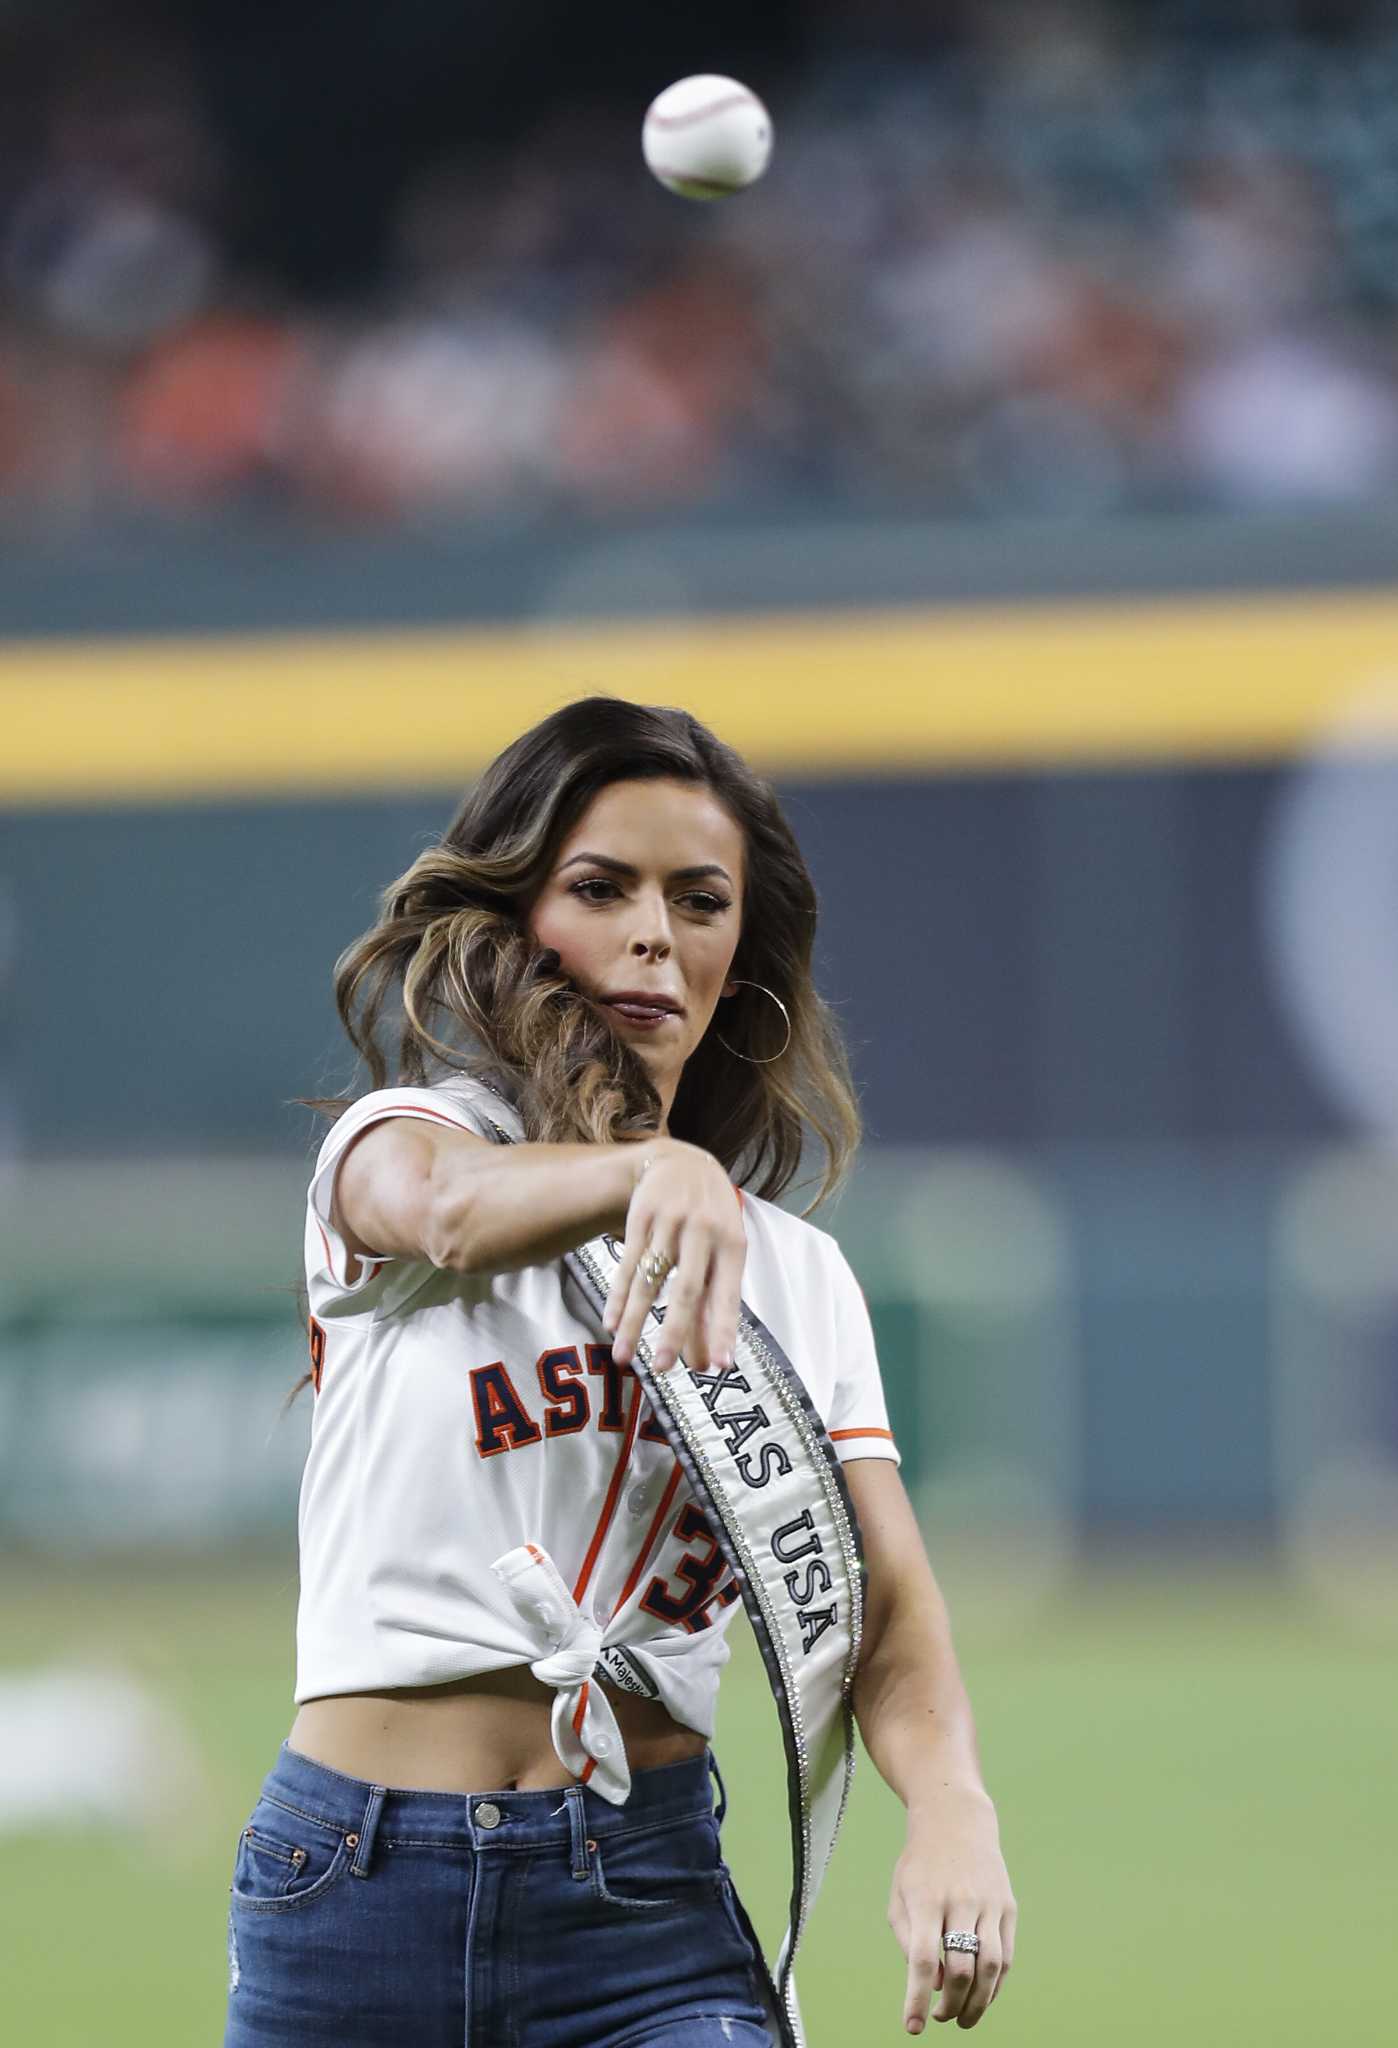 Miss Texas, Houston real estate mogul Logan Lester, throws out first pitch  at Astros game